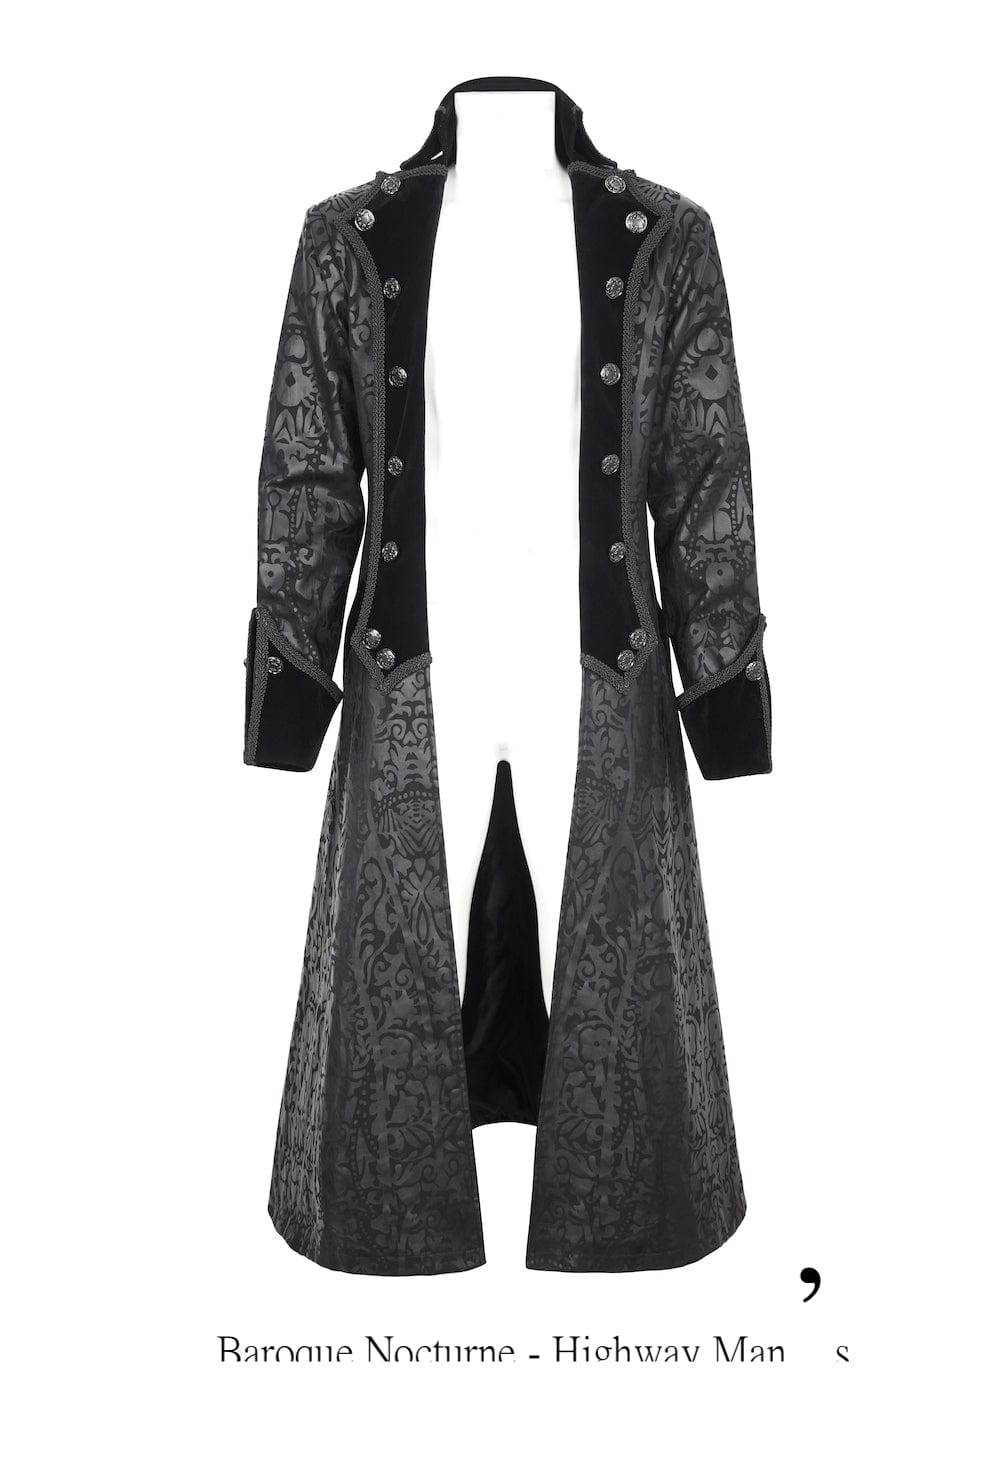 Baroque Nocturne The Highway Man's Coat mixes cyber vinyl and dark cotton twill with velvet and baroque patterning to create an adventurer's coat.  A Devil Fashion design for scoundrels and gentlemen